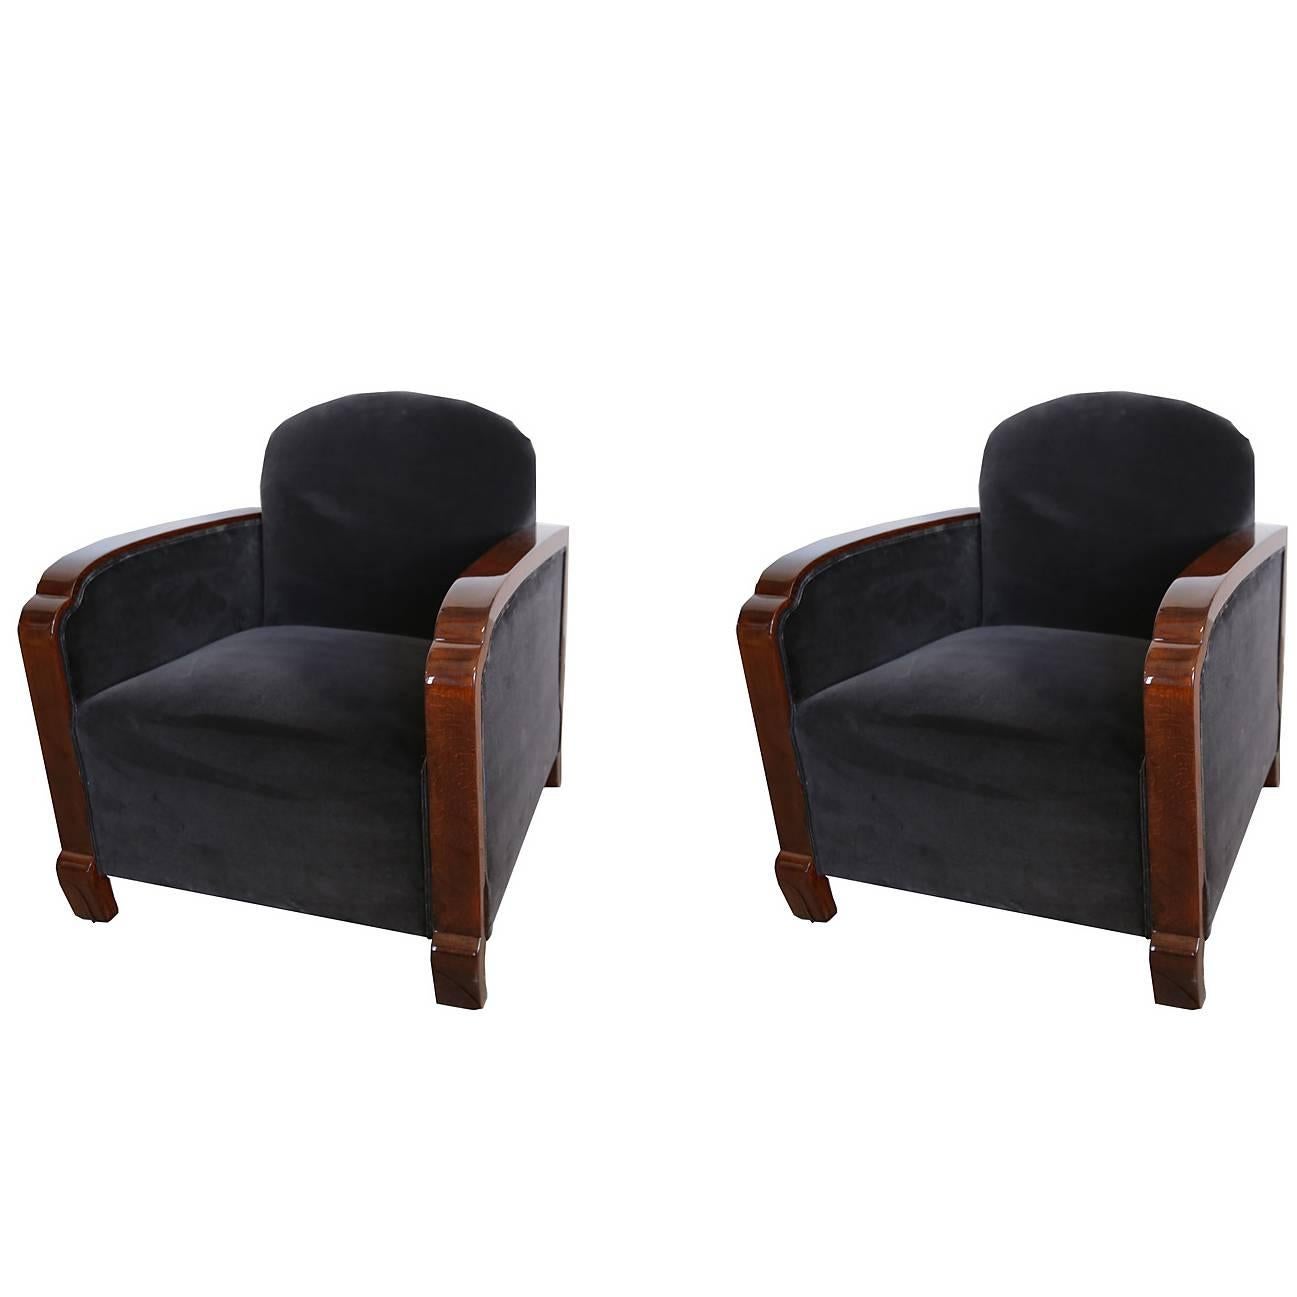 Pair of French Art Deco Armchairs circa 1930s